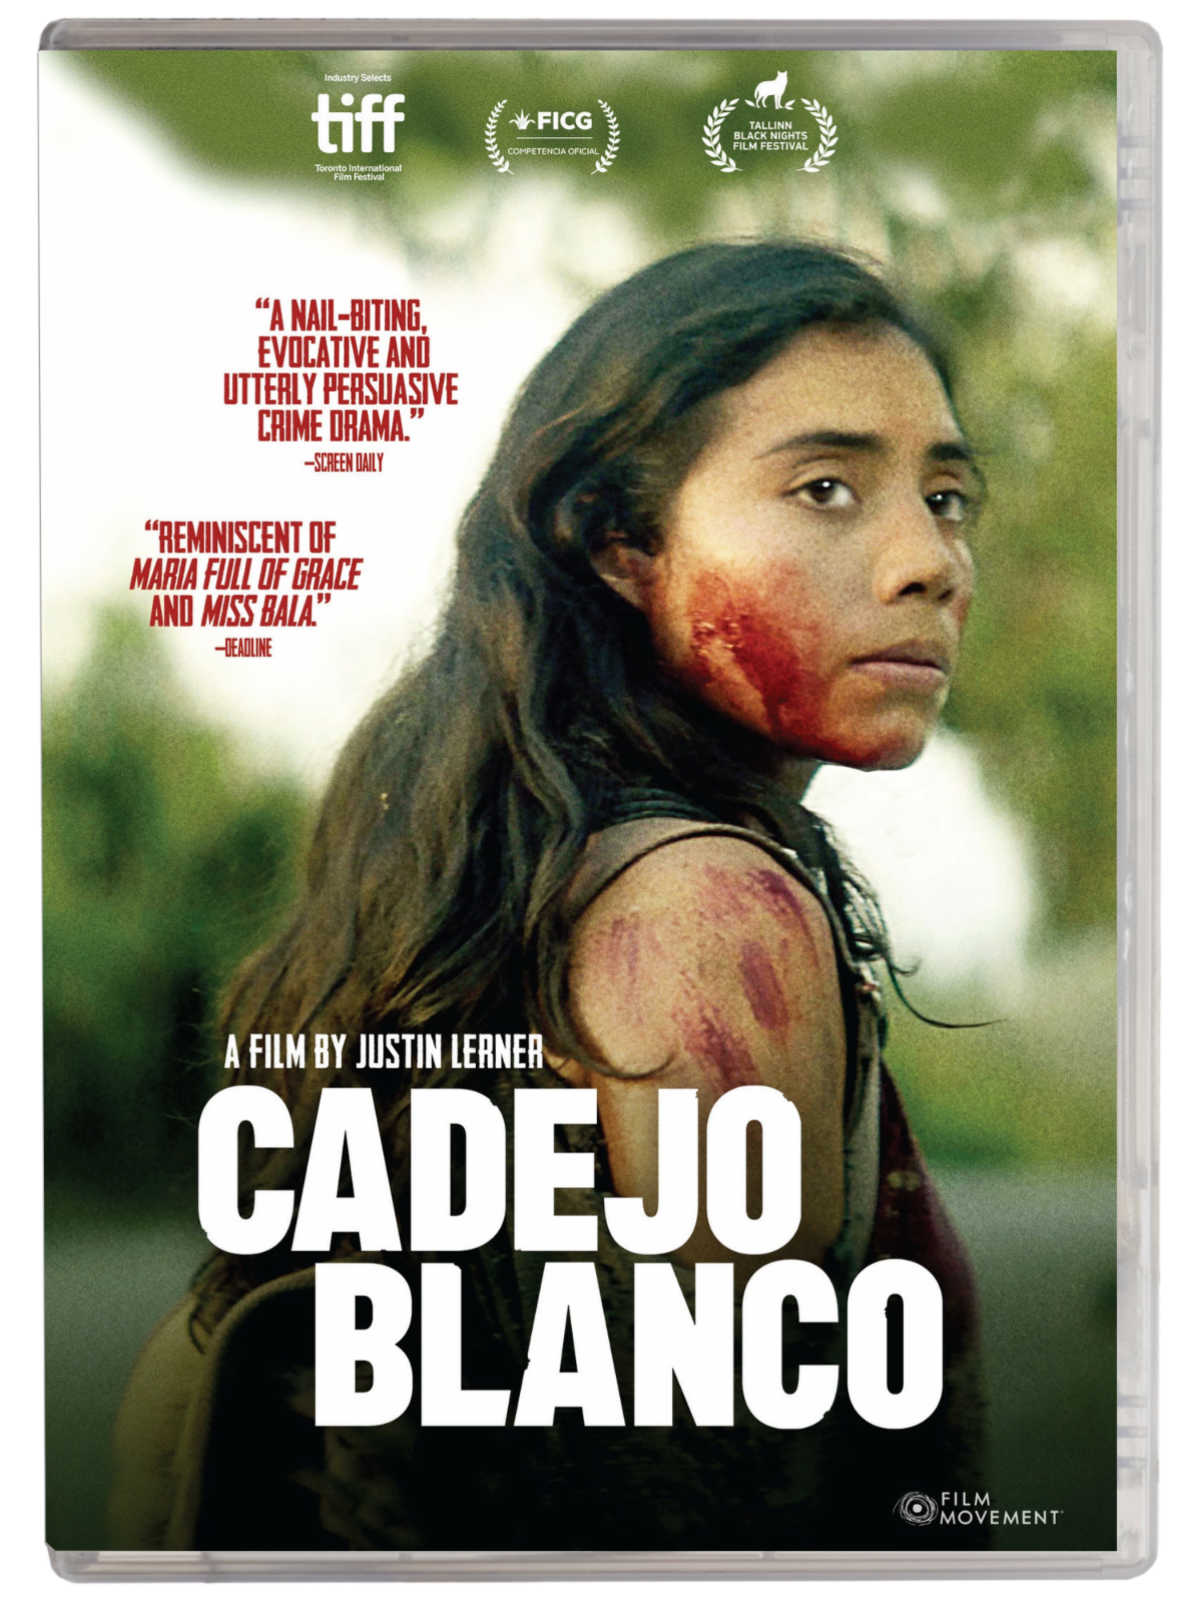 Cadejo Blanco is a gritty, intense, and realistic crime drama that offers a unique perspective on the world of Guatemalan gangs. The film follows the story of Sarita, a young woman who goes undercover in a gang to find her missing sister.